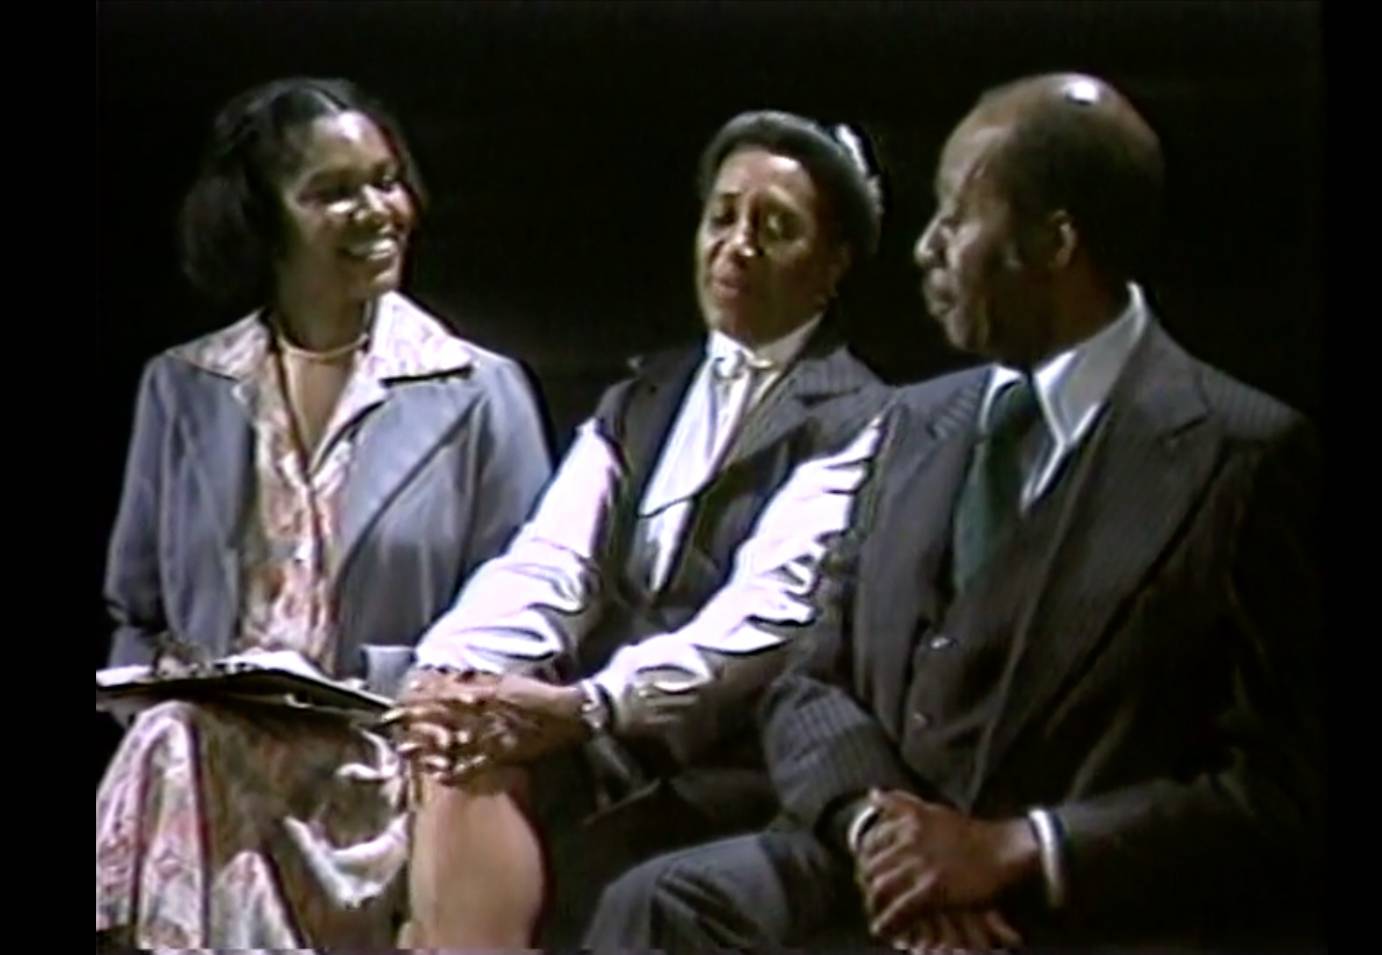 a young  smiling black woman in a white dress with purple flowers and purple jacket interviews two elder black performers of the Lindy Hop, one woman and one man, both elders  dressed formally in black and white,  in a dark =walled studio 